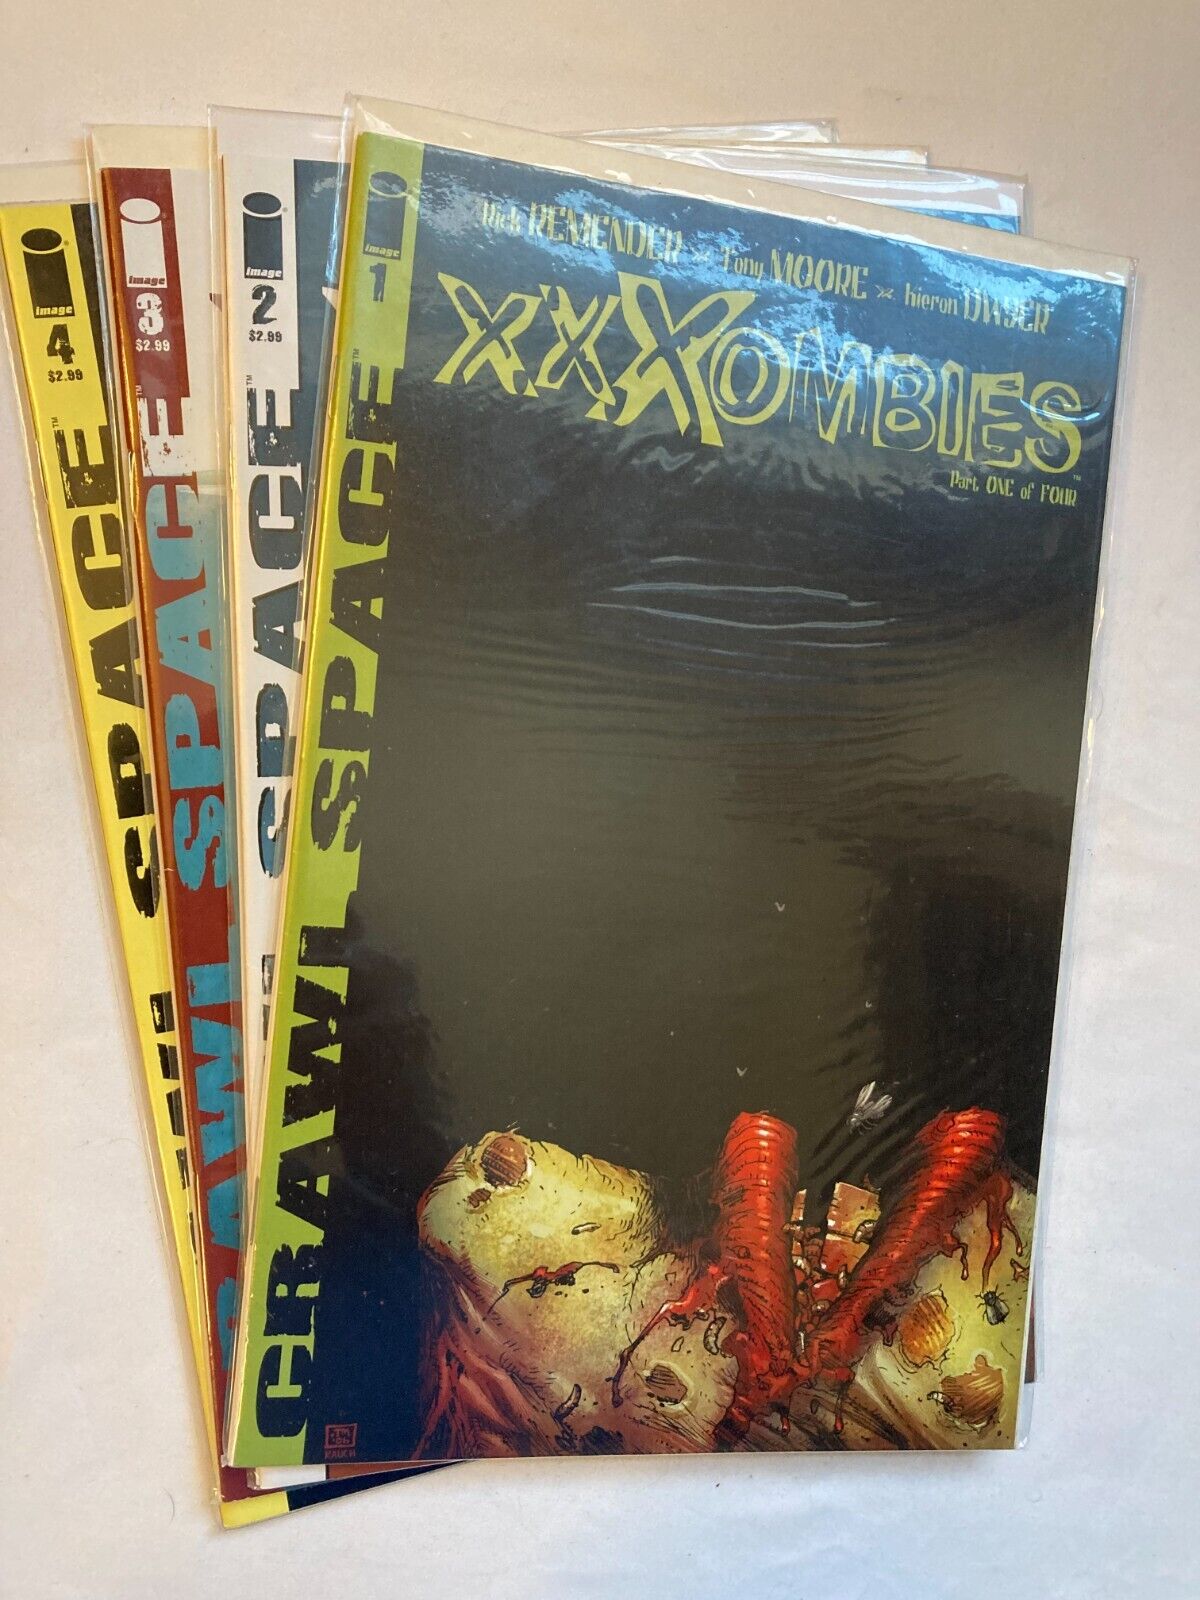 XXXOMBIES comic (2007, Image) #1-4 full run #1 is Tony Moore variant All (NM-)